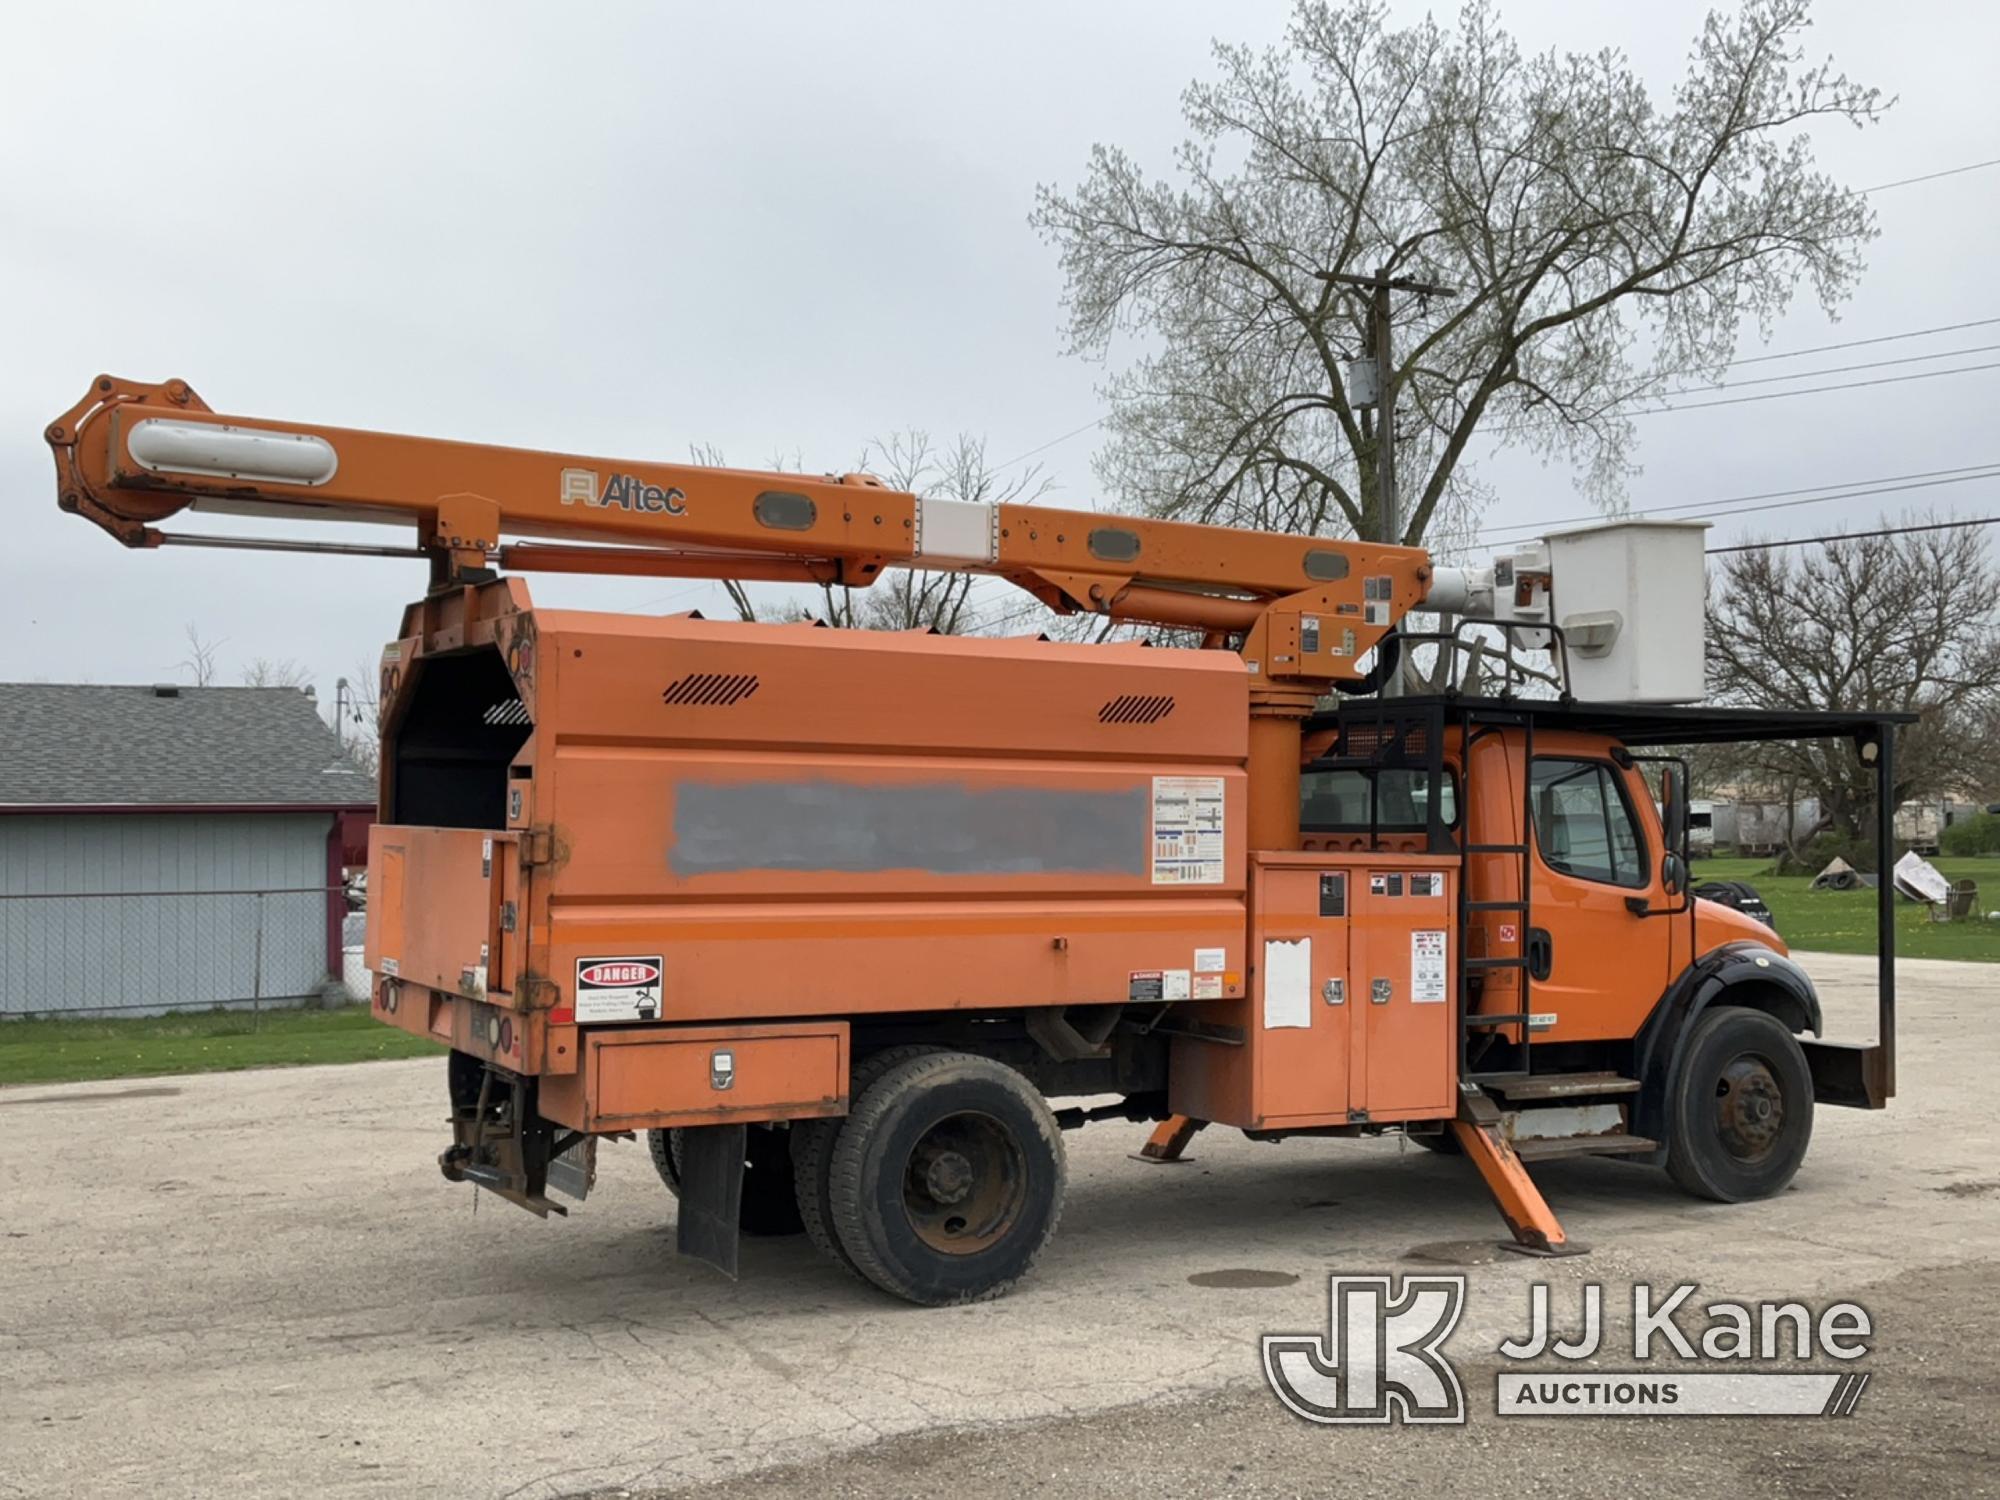 (South Beloit, IL) Altec LRV55, Over-Center Bucket Truck mounted behind cab on 2011 Freightliner M21